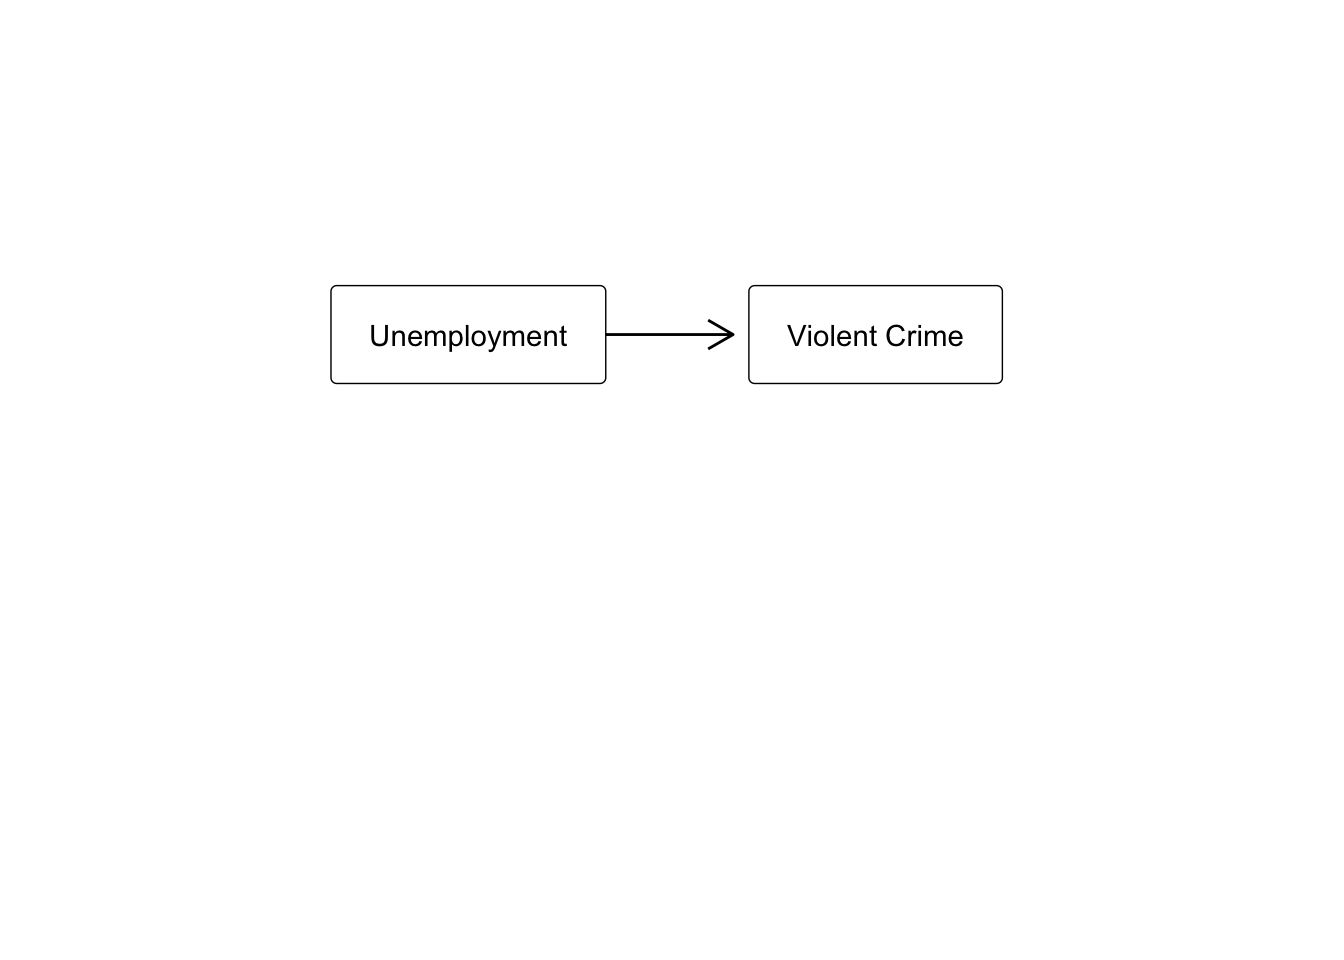 A rounded box with label 'Unemployment', with an arrow pointing to the right to a second rounded box with label 'Violent Crime'.